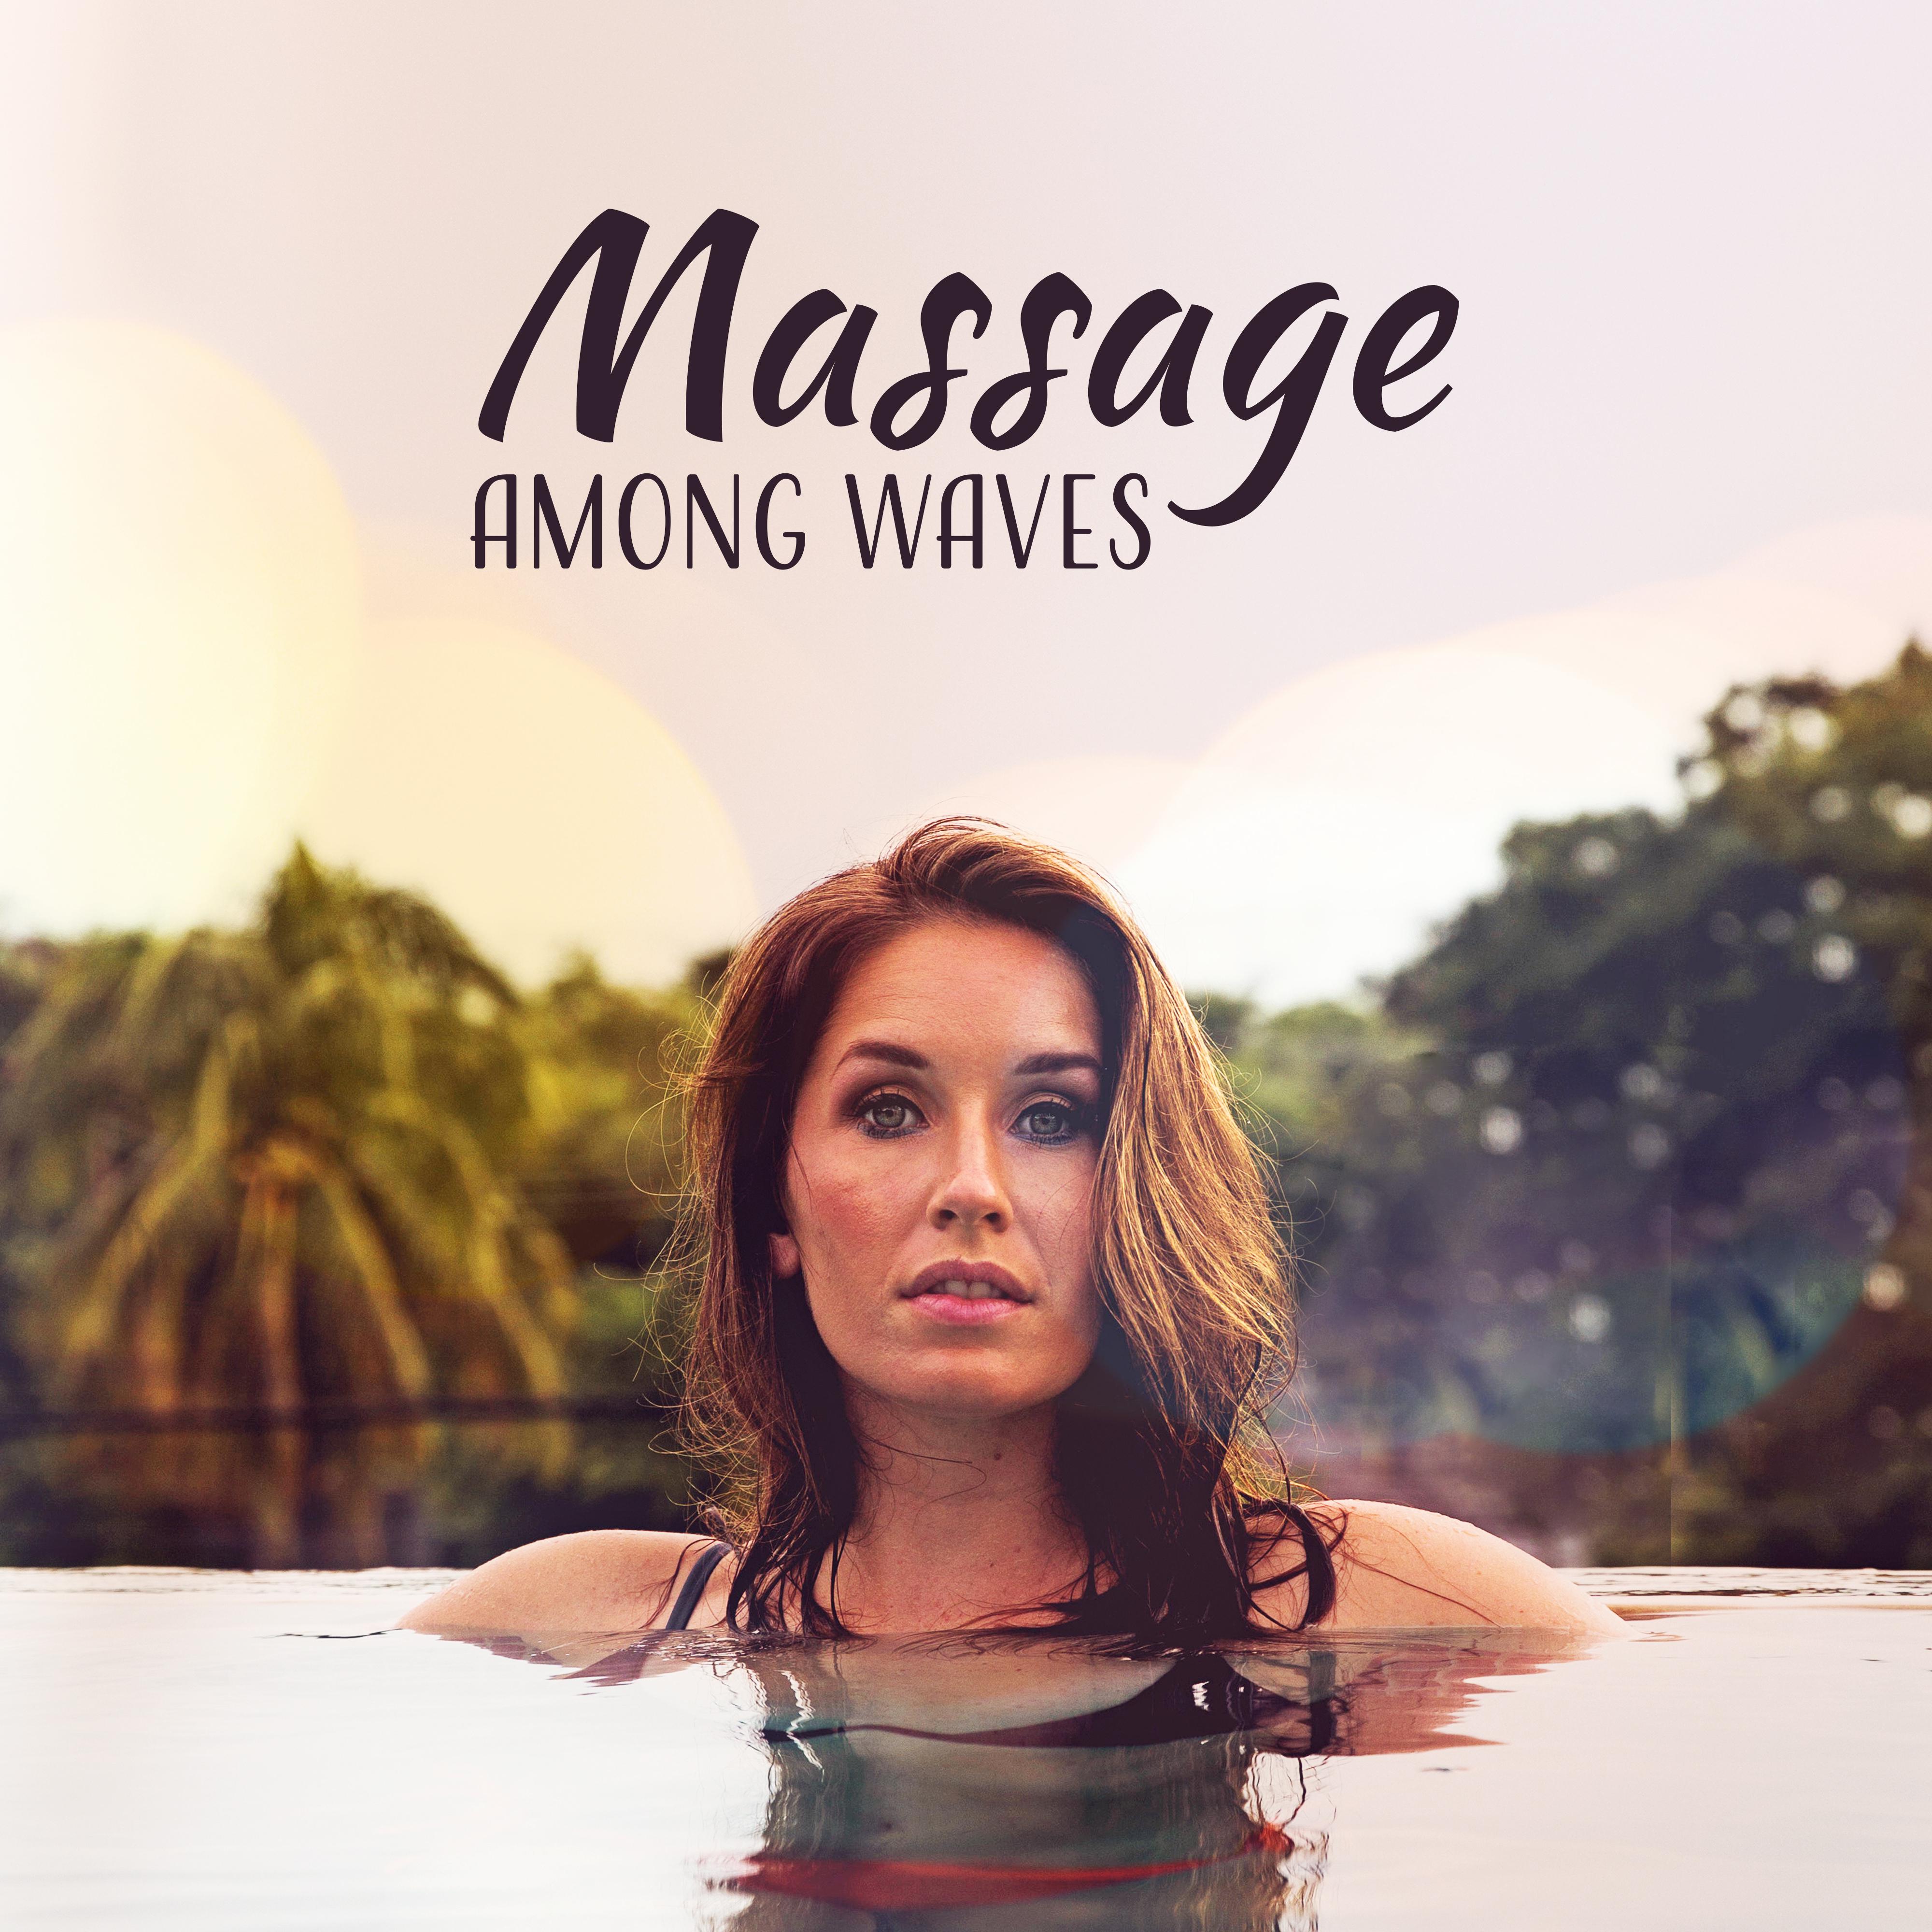 Massage Among Waves  Relaxing New Age, Music for Massage, Spa, Wellness Treatments, Relax